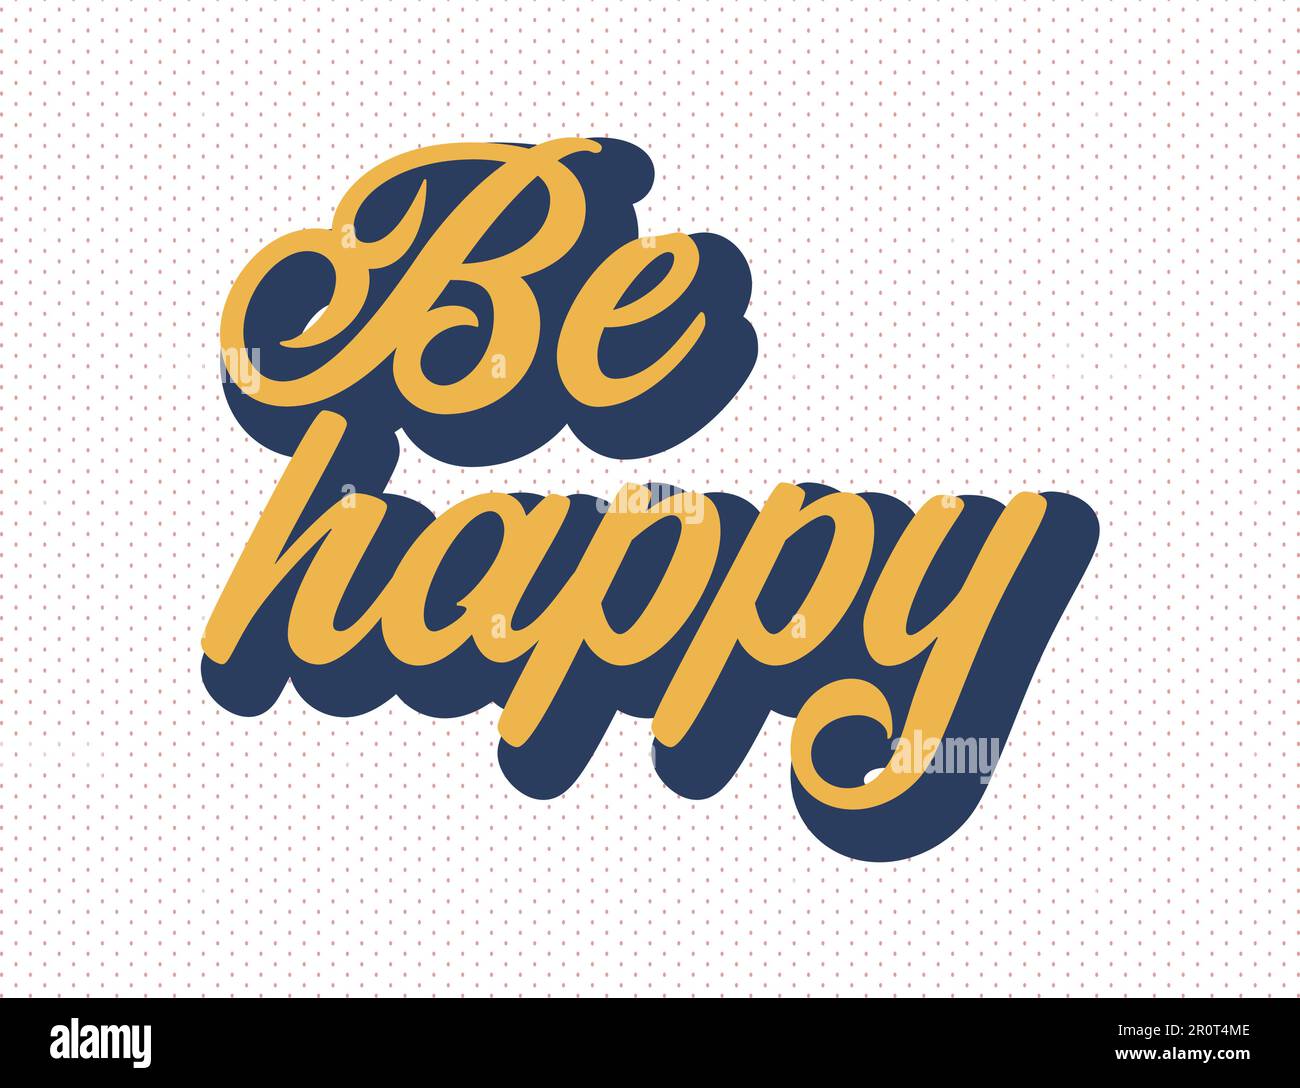 Vector be happy typography groovy style illustration Stock Vector